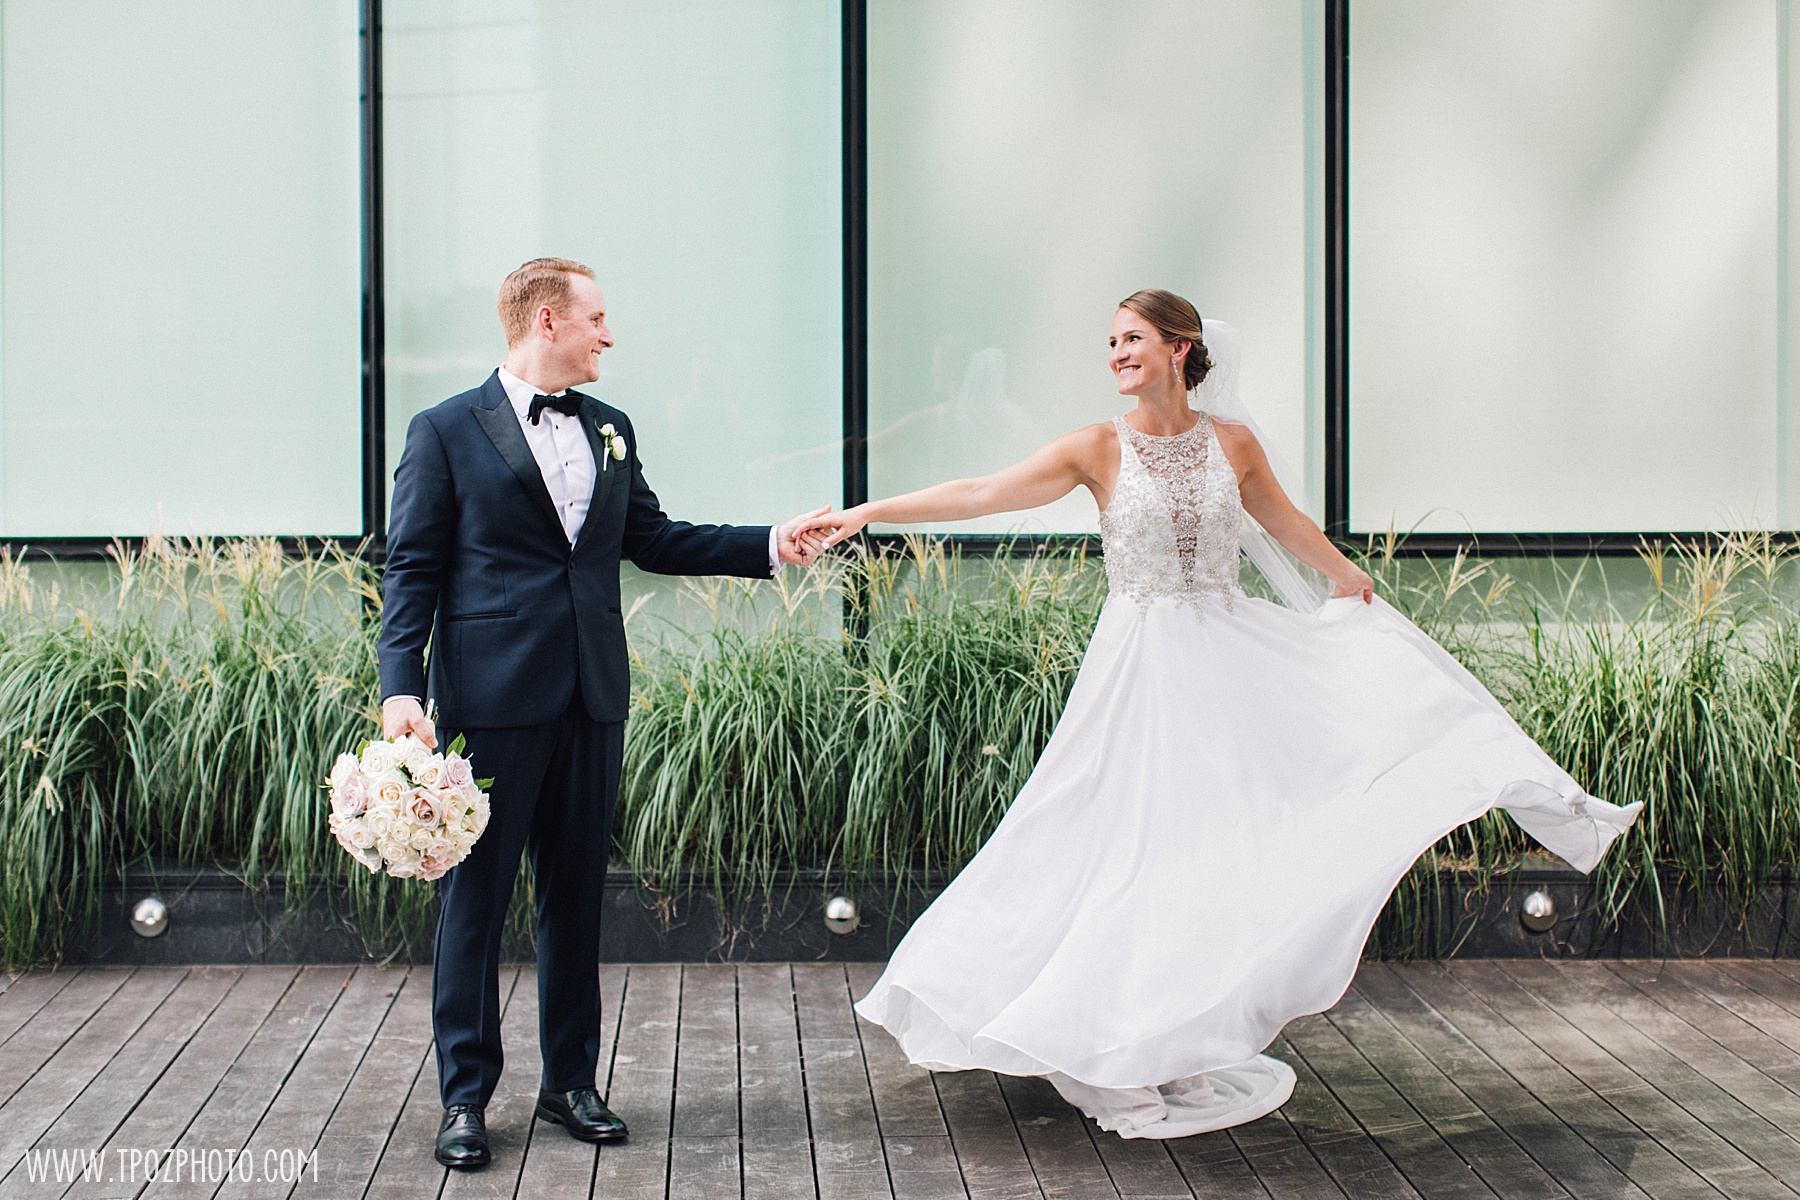 A groom twirling his bride at the Four Seasons Baltimore wedding